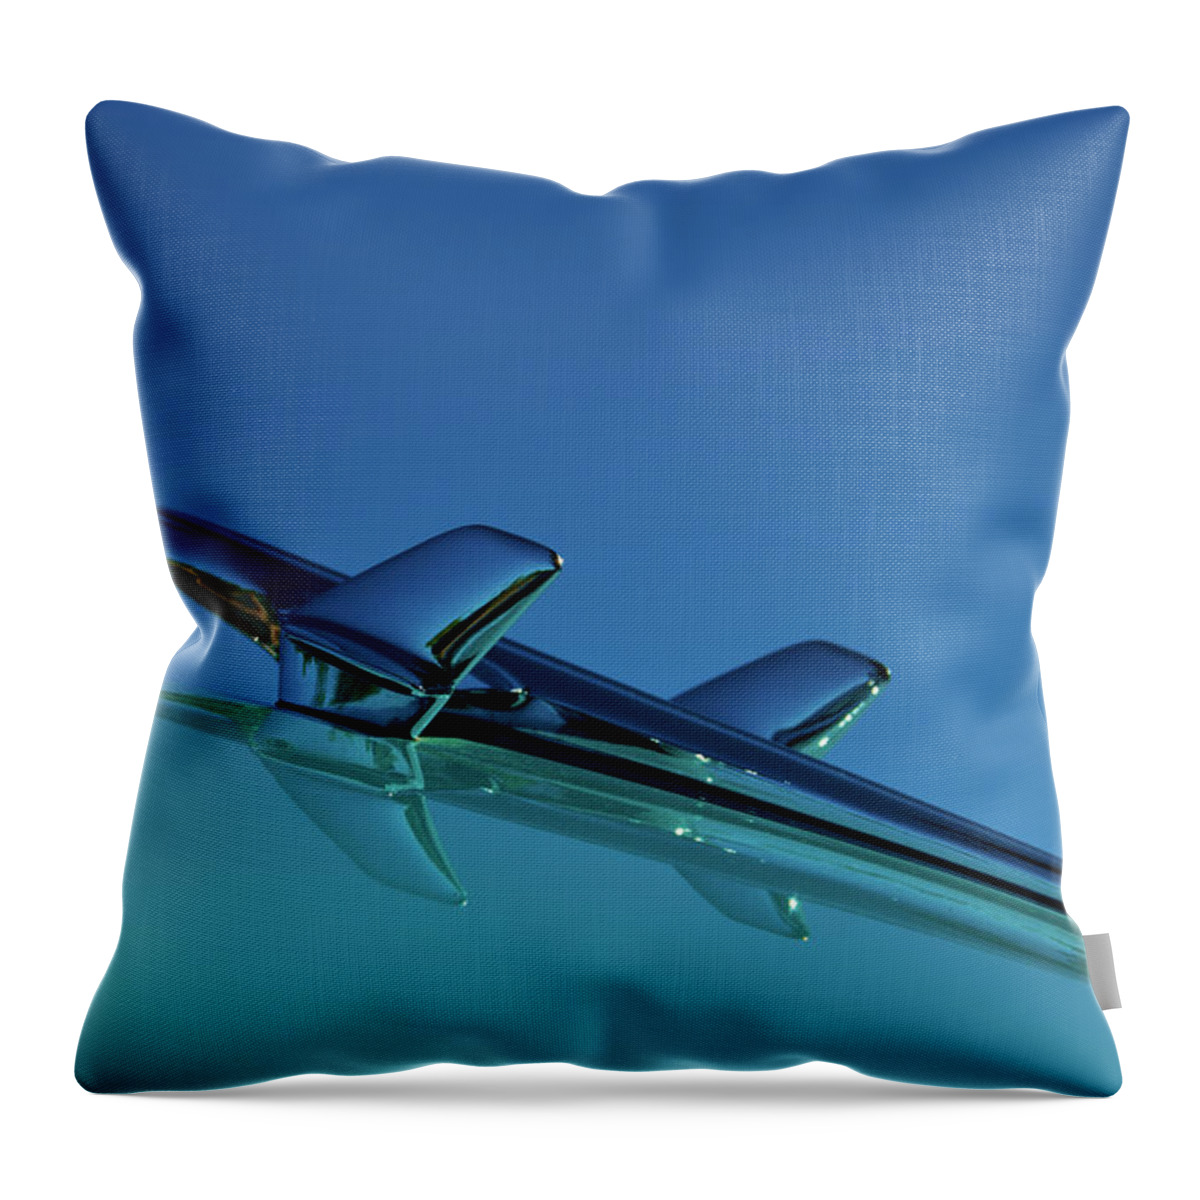 Chevy Throw Pillow featuring the photograph 1956 Chevy Belair Hood Ornament by Jani Freimann